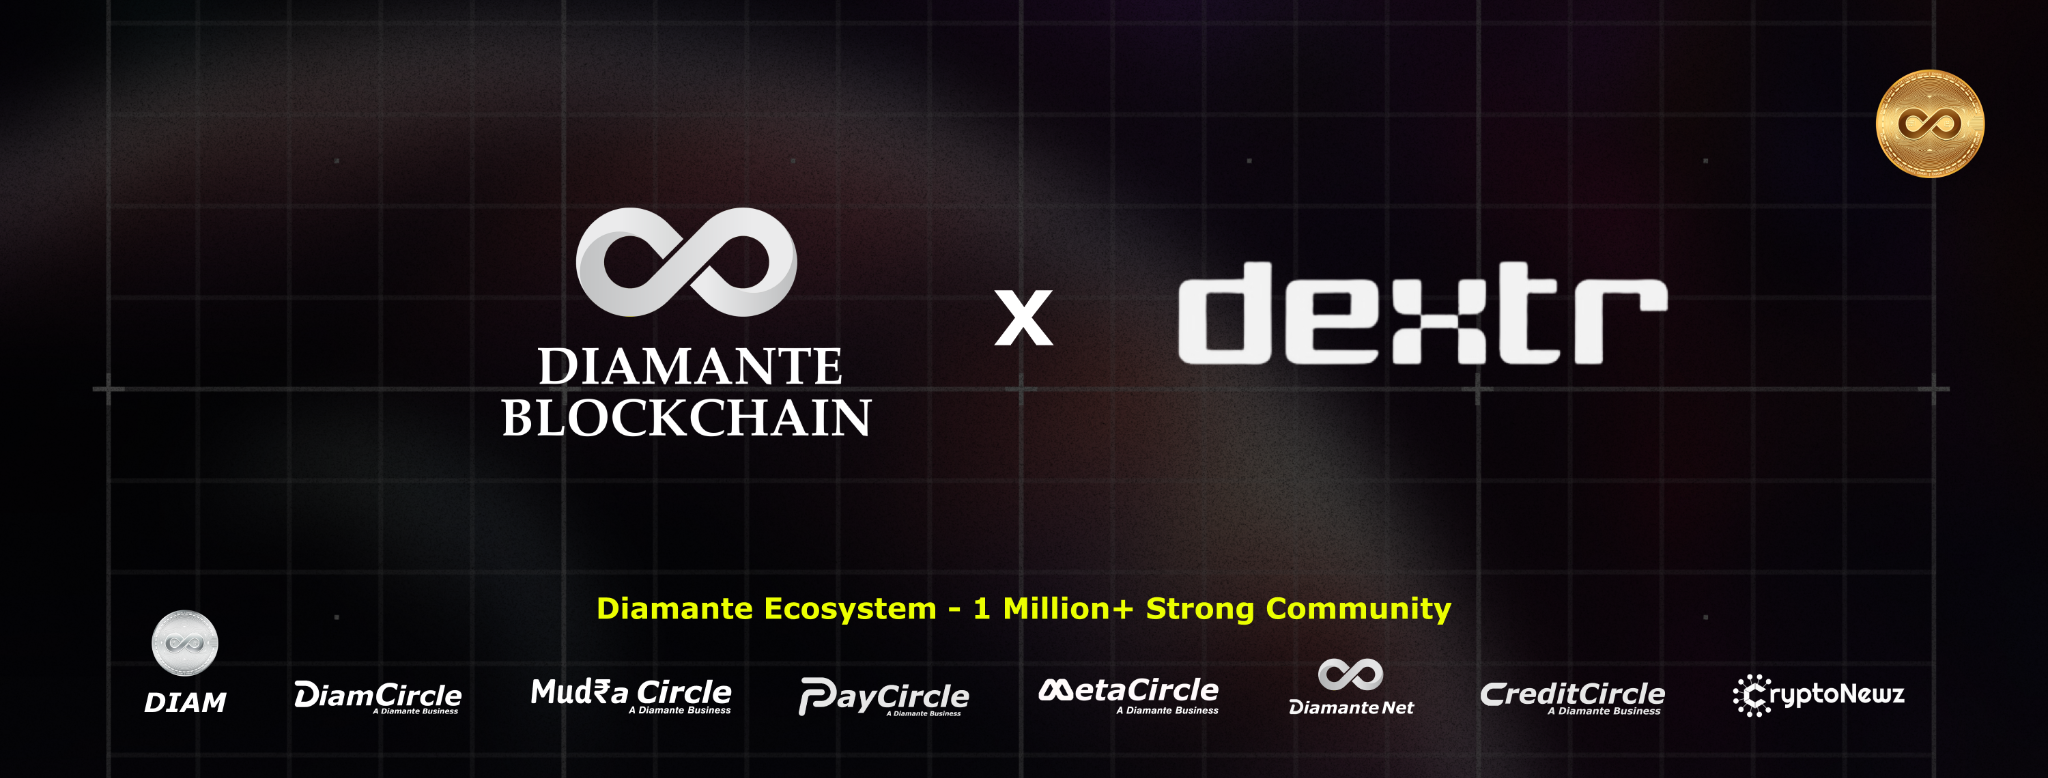 Diamante Blockchain partners with Dextr Exchange, featuring the Diamante Blockchain and Dextr logos side by side, highlighting the collaboration between a leading enterprise blockchain technology firm and a hybrid decentralized exchange with a strong community of over 1 million members. Includes logos of Diamante's ecosystem businesses: DIAM, DiamCircle, MudraCircle, PayCircle, MetaCircle, Diamante Net, CreditCircle, and CryptoNewz.